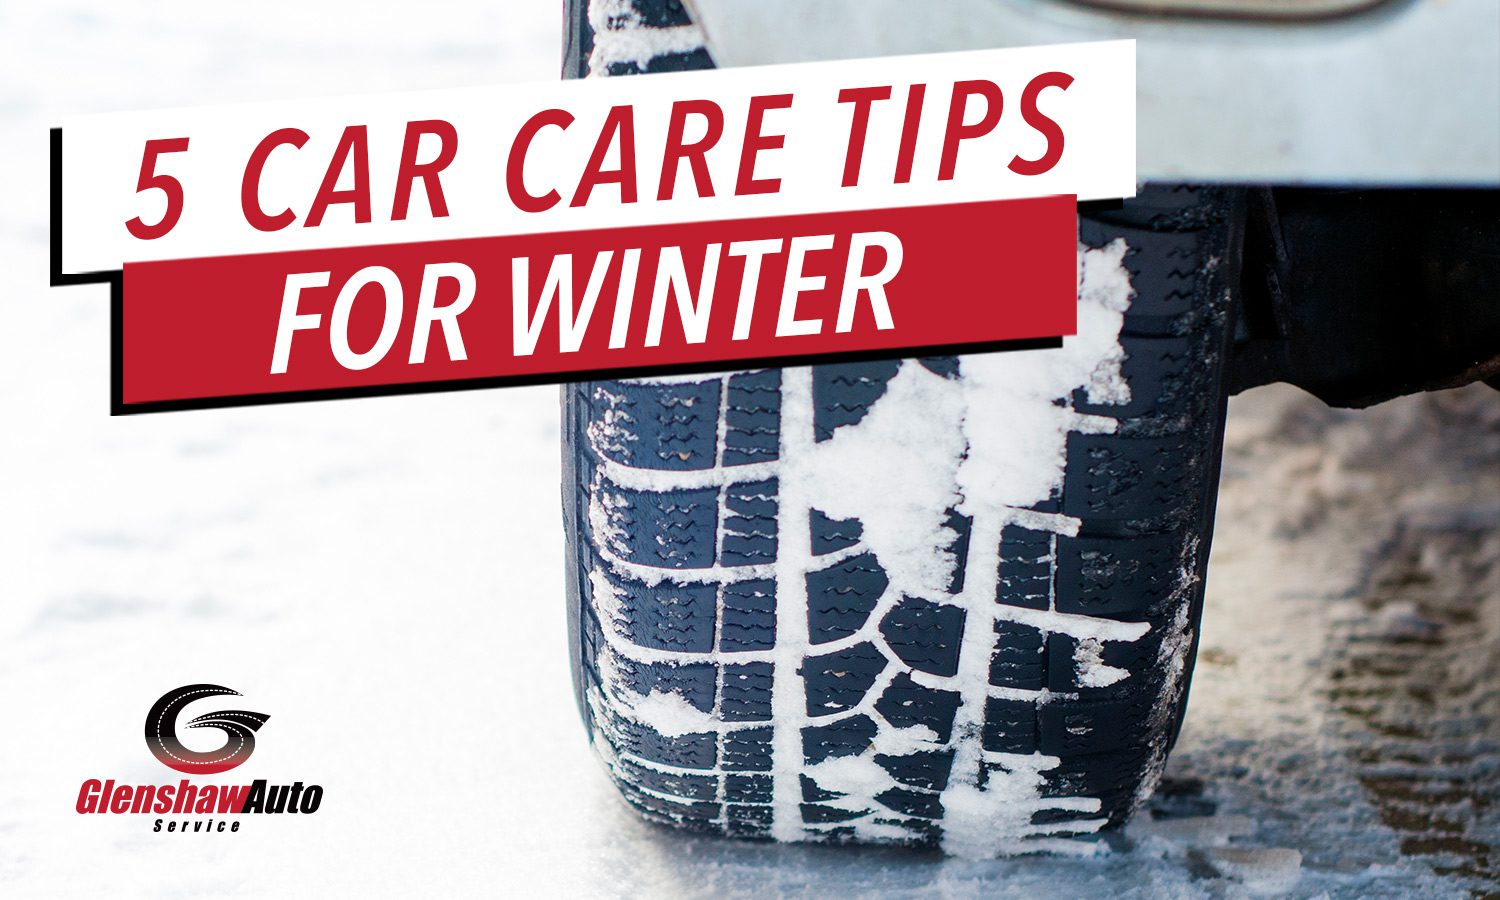 Car care tips for winterImage of car tire in the snow